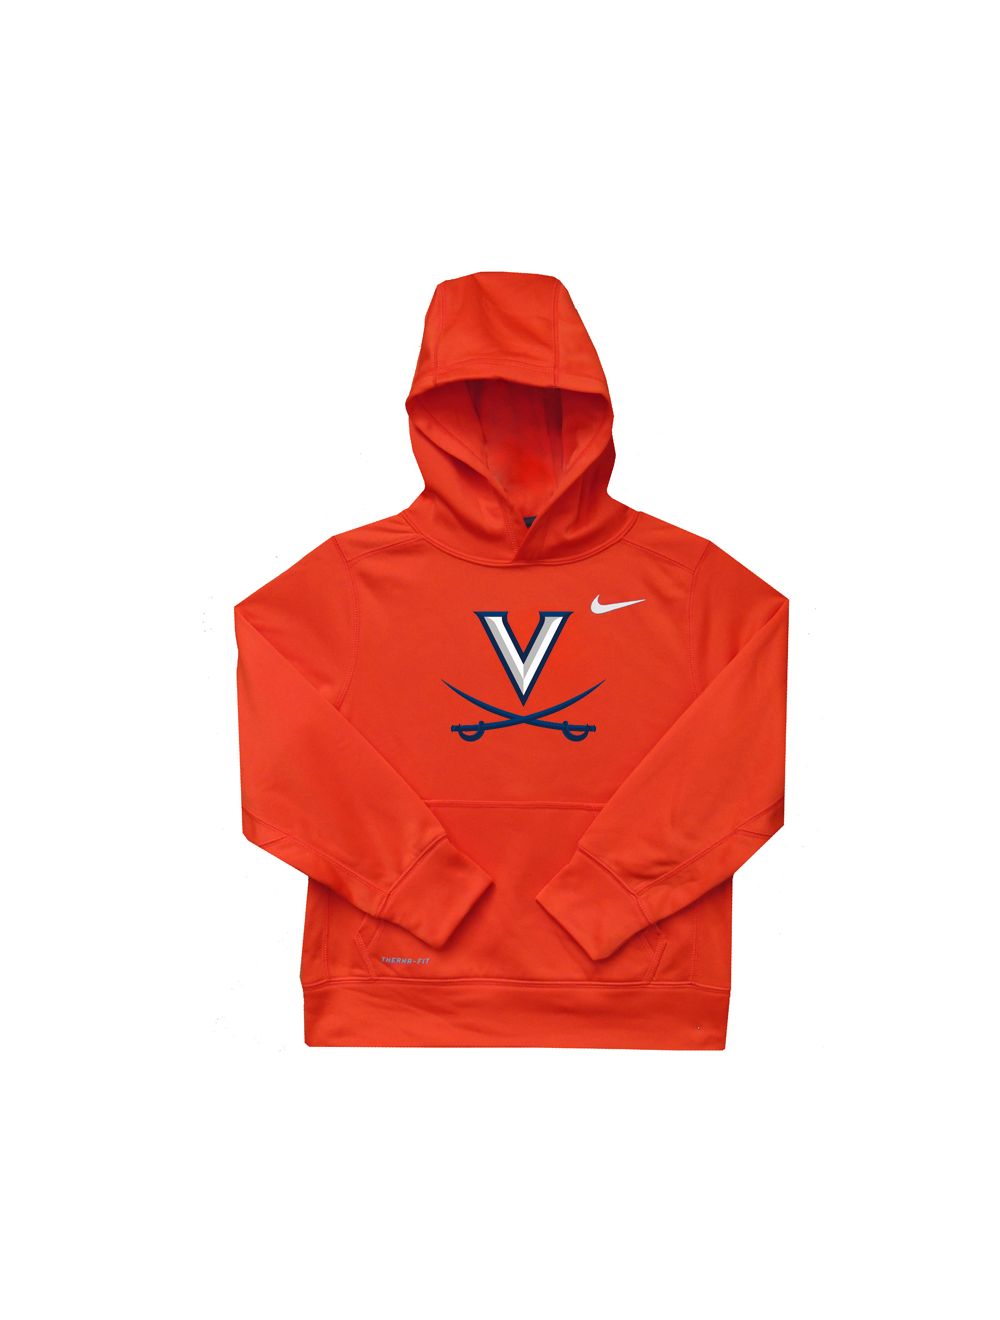 Nike Orange Youth ThermaFit Hood with New V and Crossed Sabers - Mincer ...